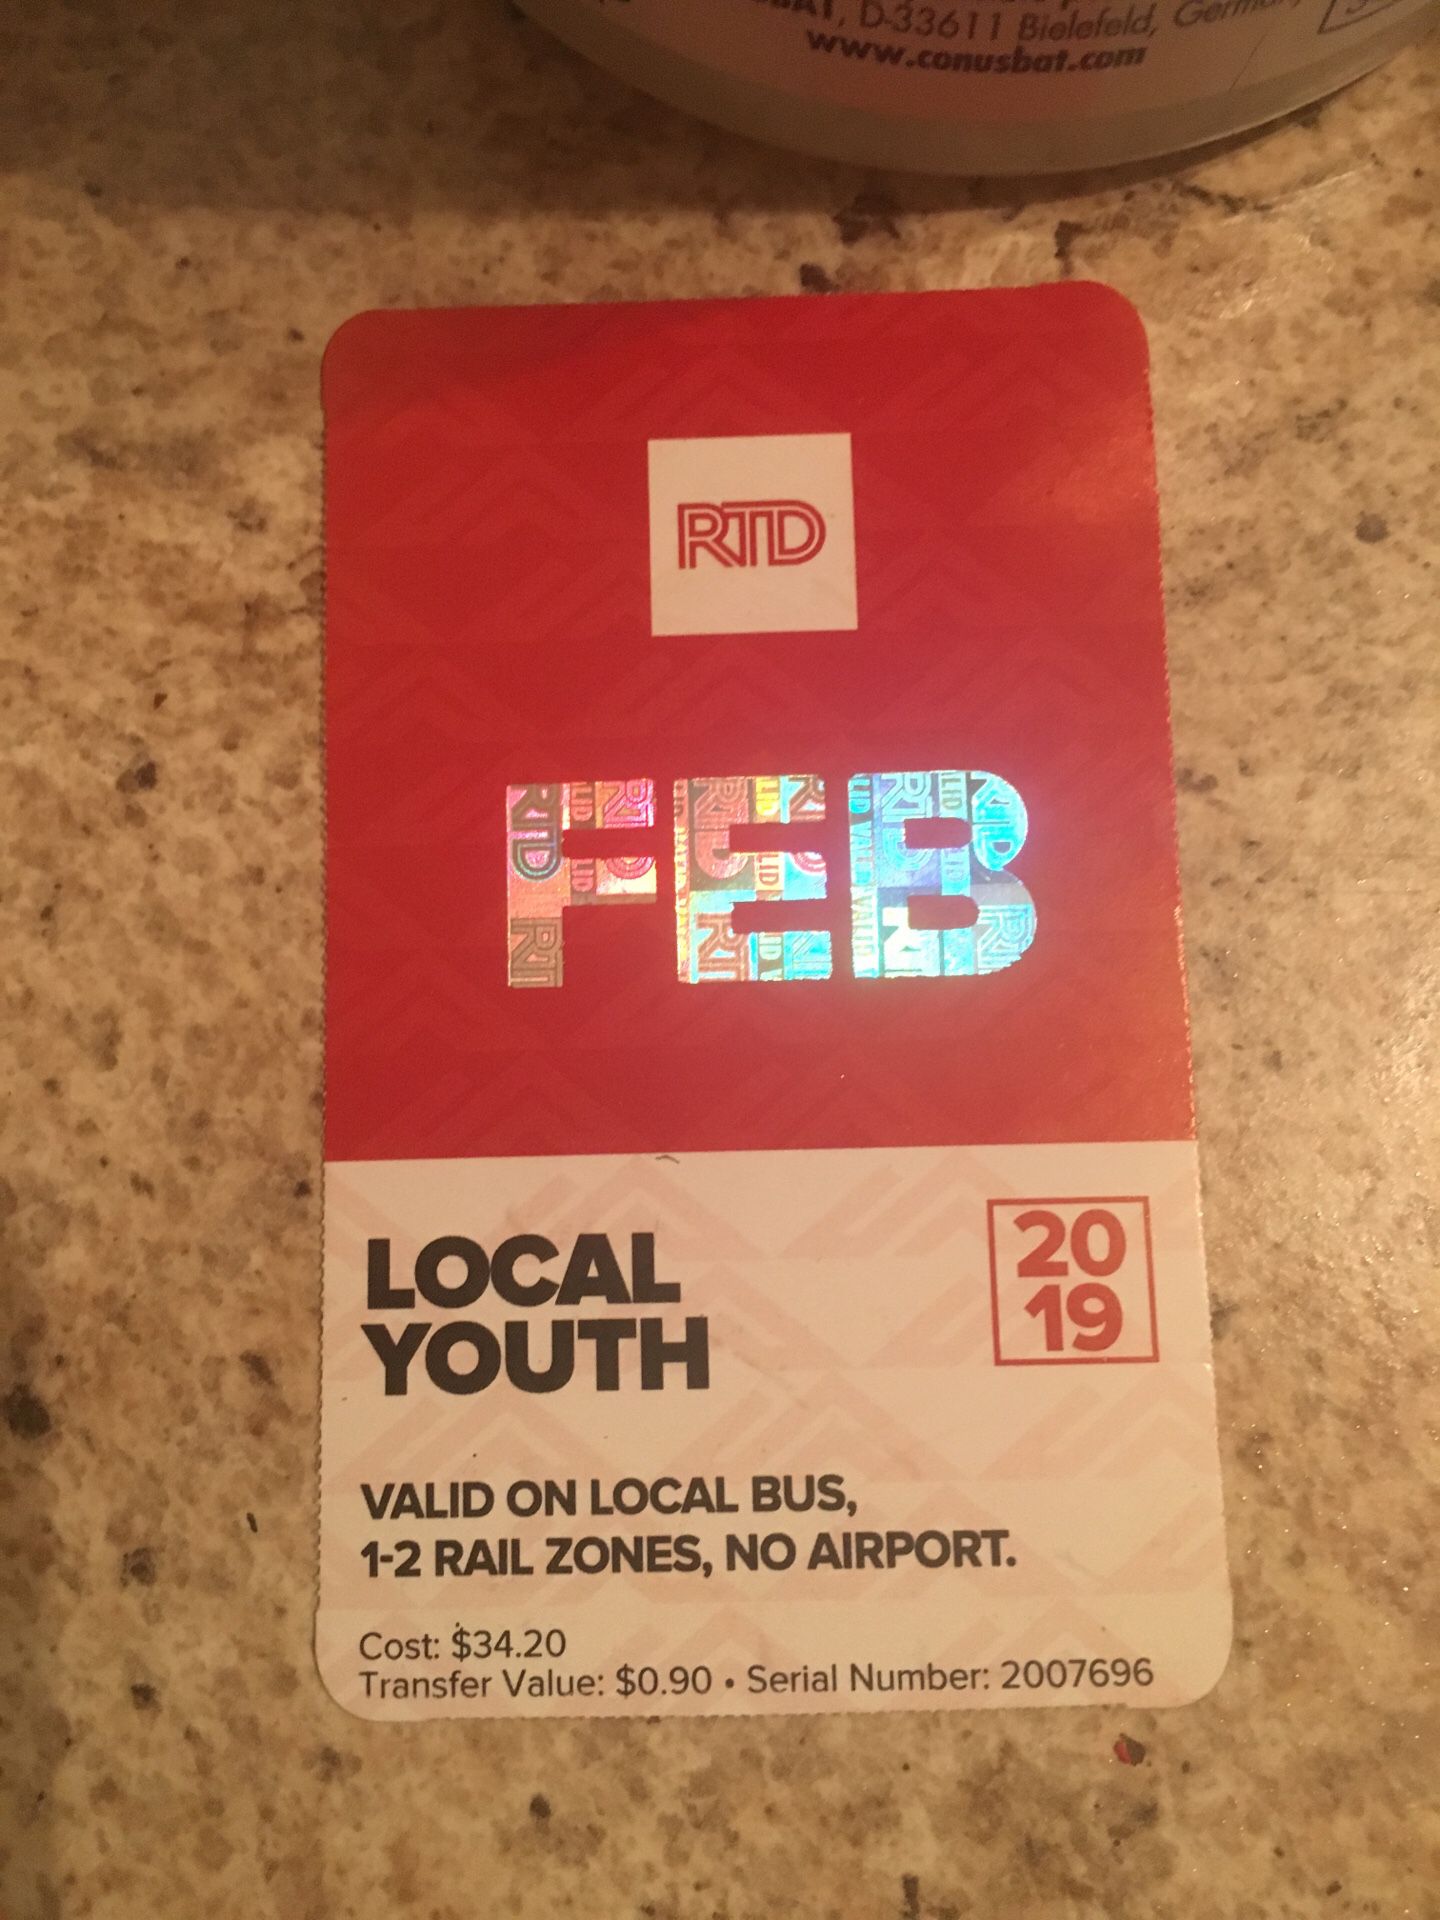 February buss pass 6yr old -19yr old